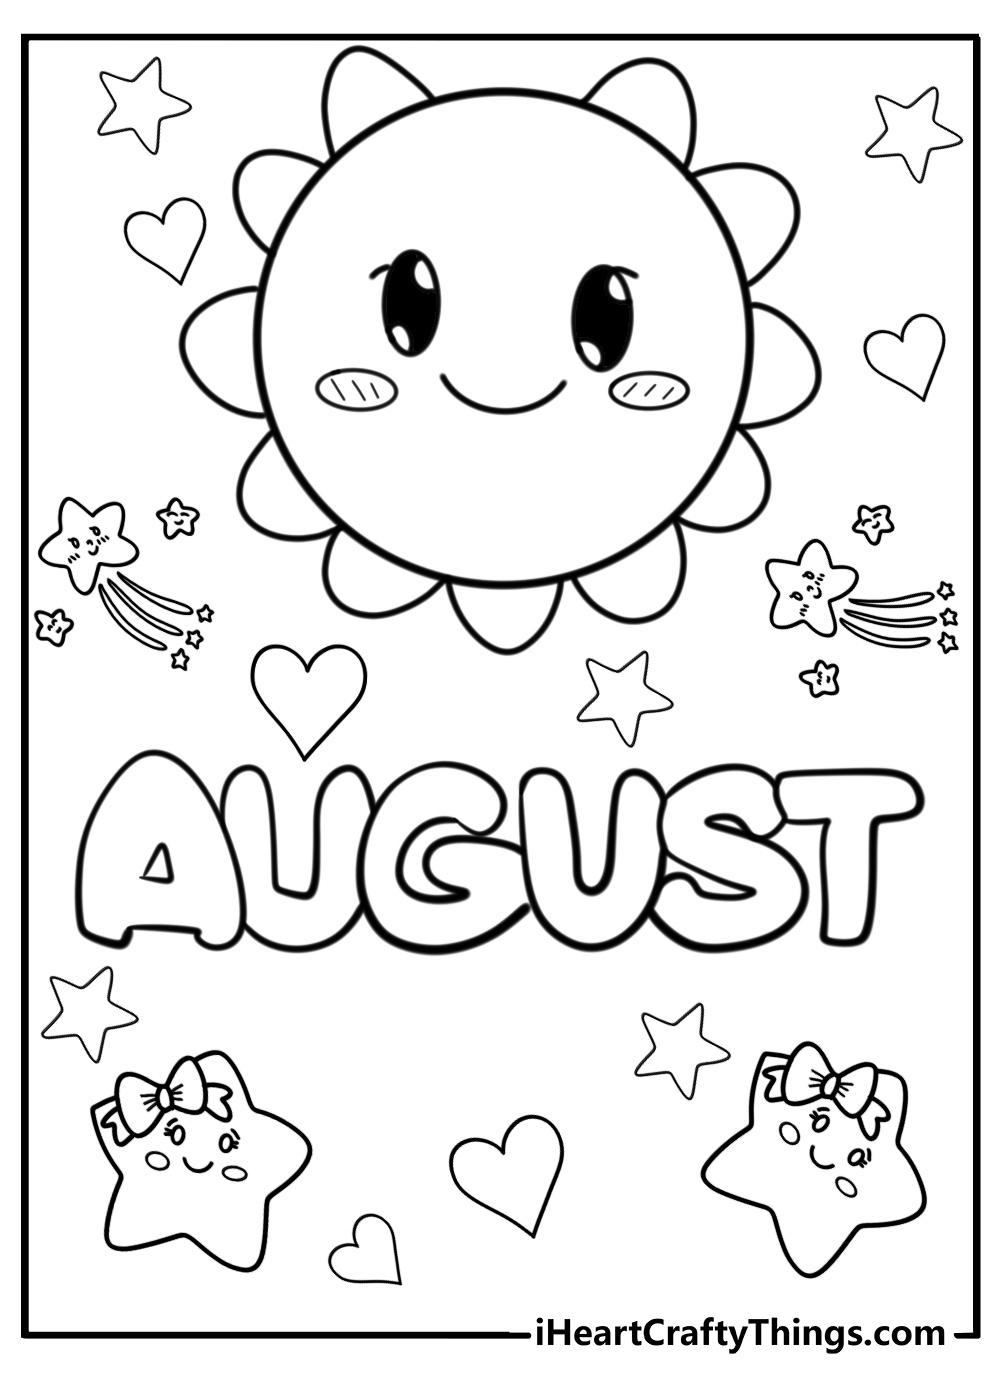 August coloring sheet